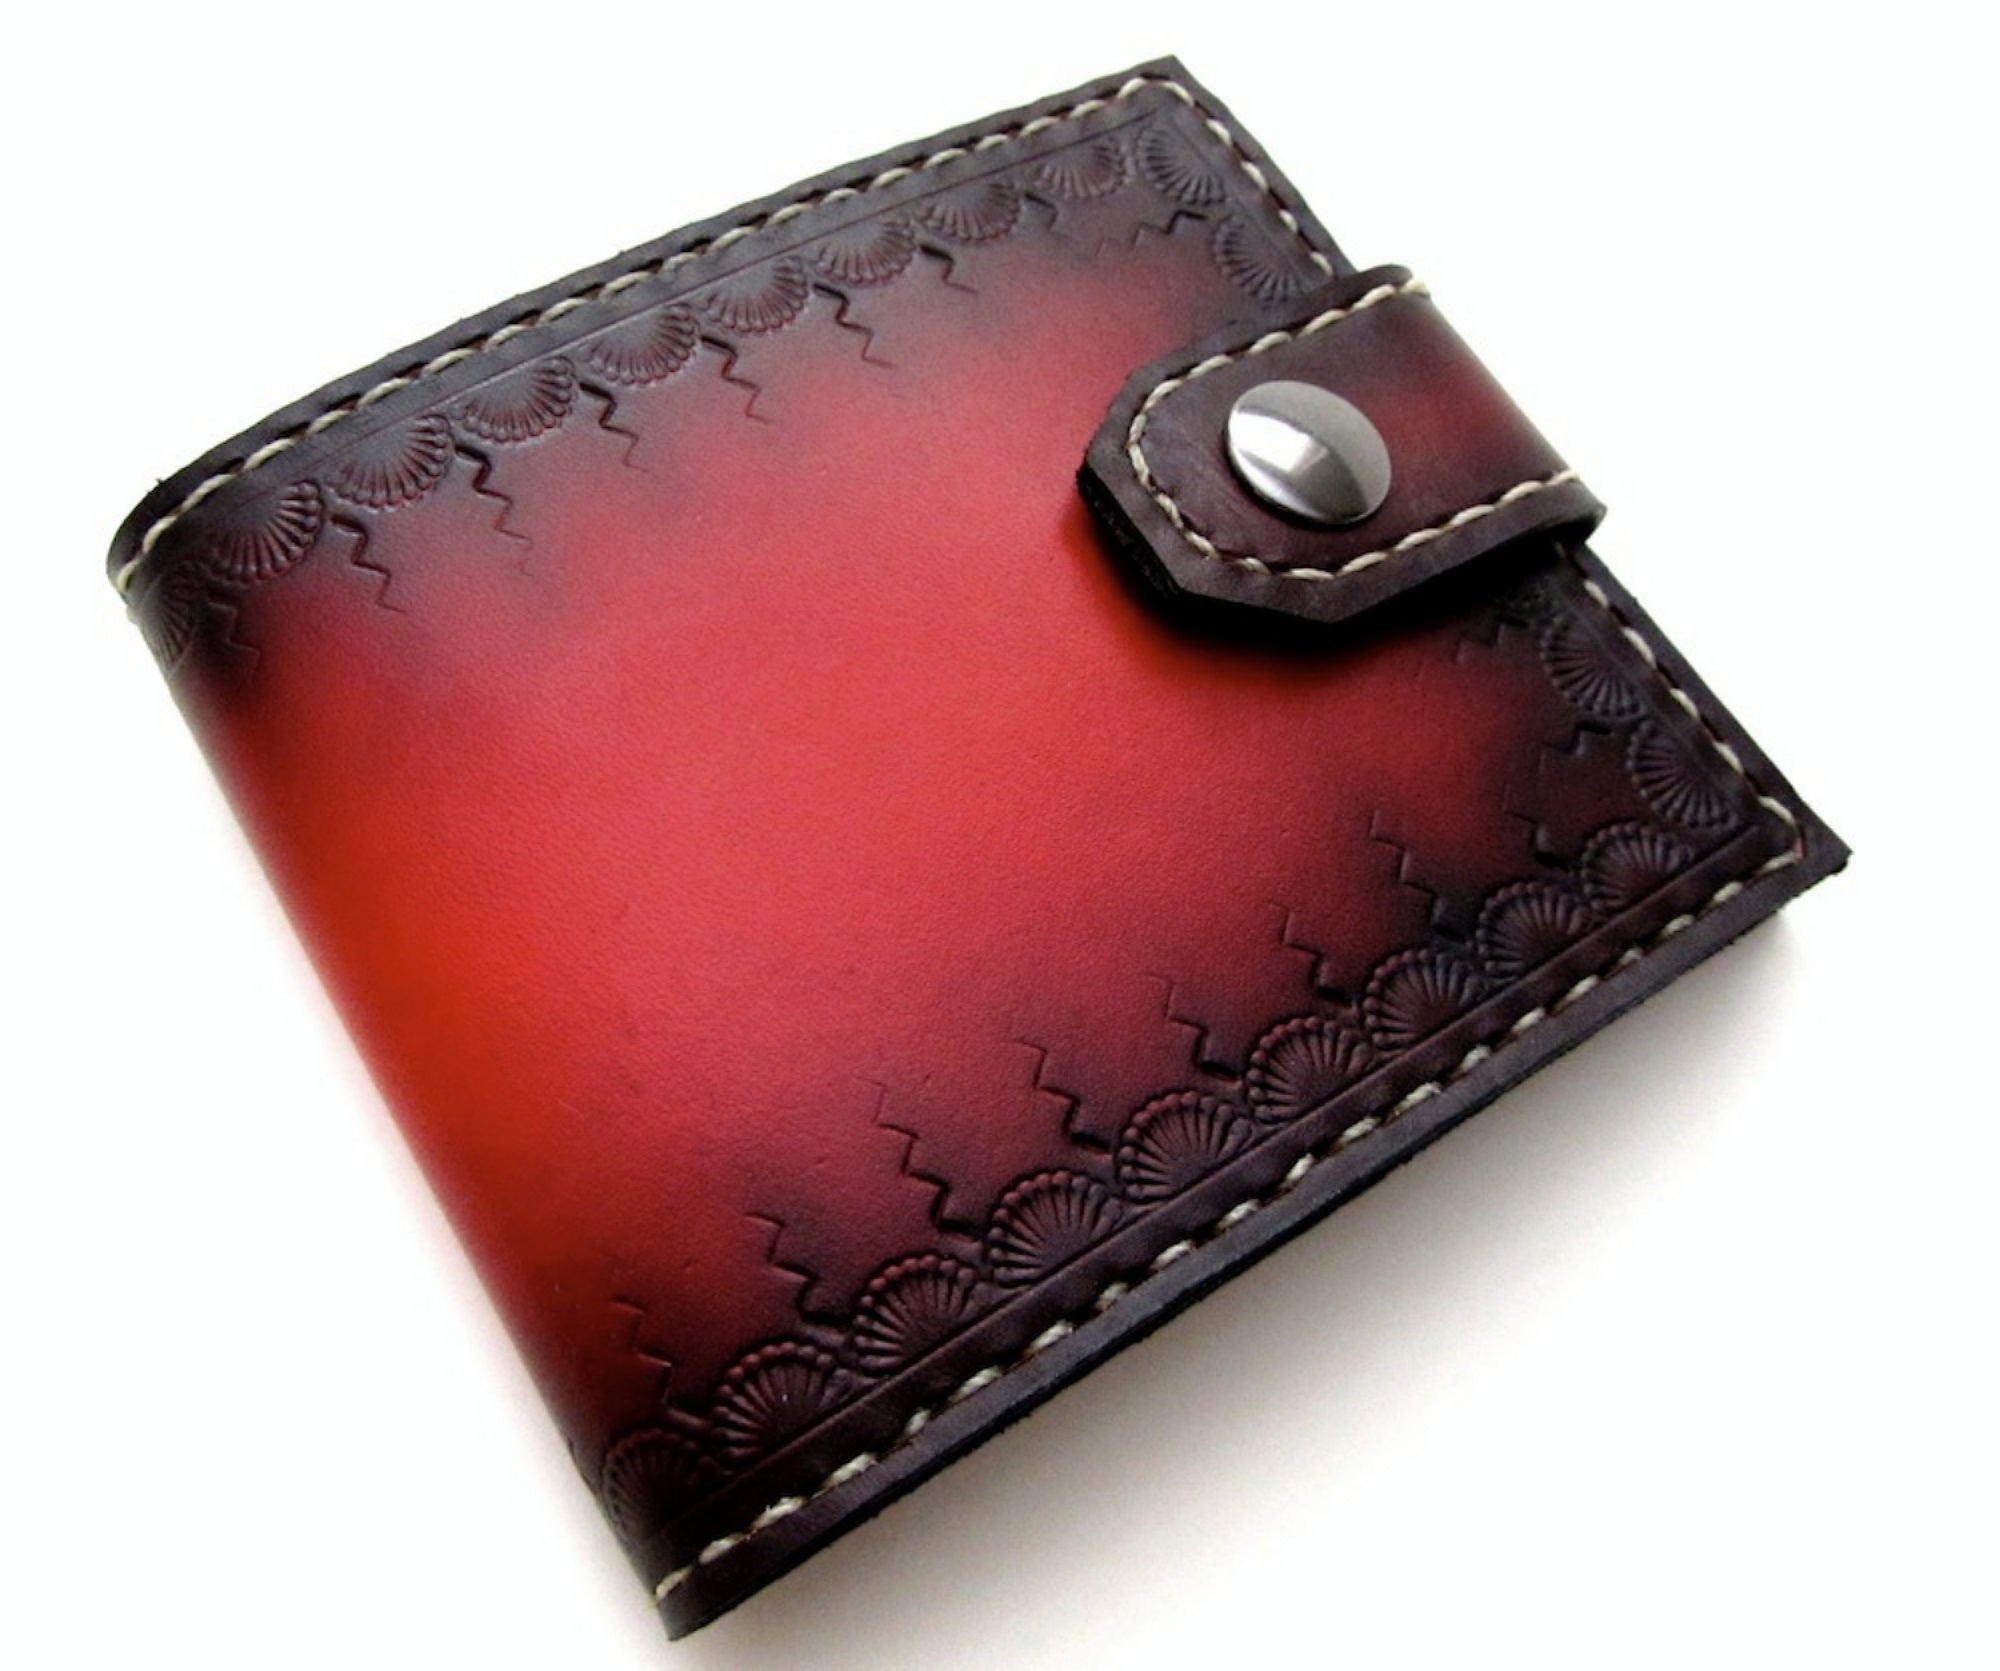 Metallic Weave on Leather Wallet with Multiple Pockets - Scintillating Red